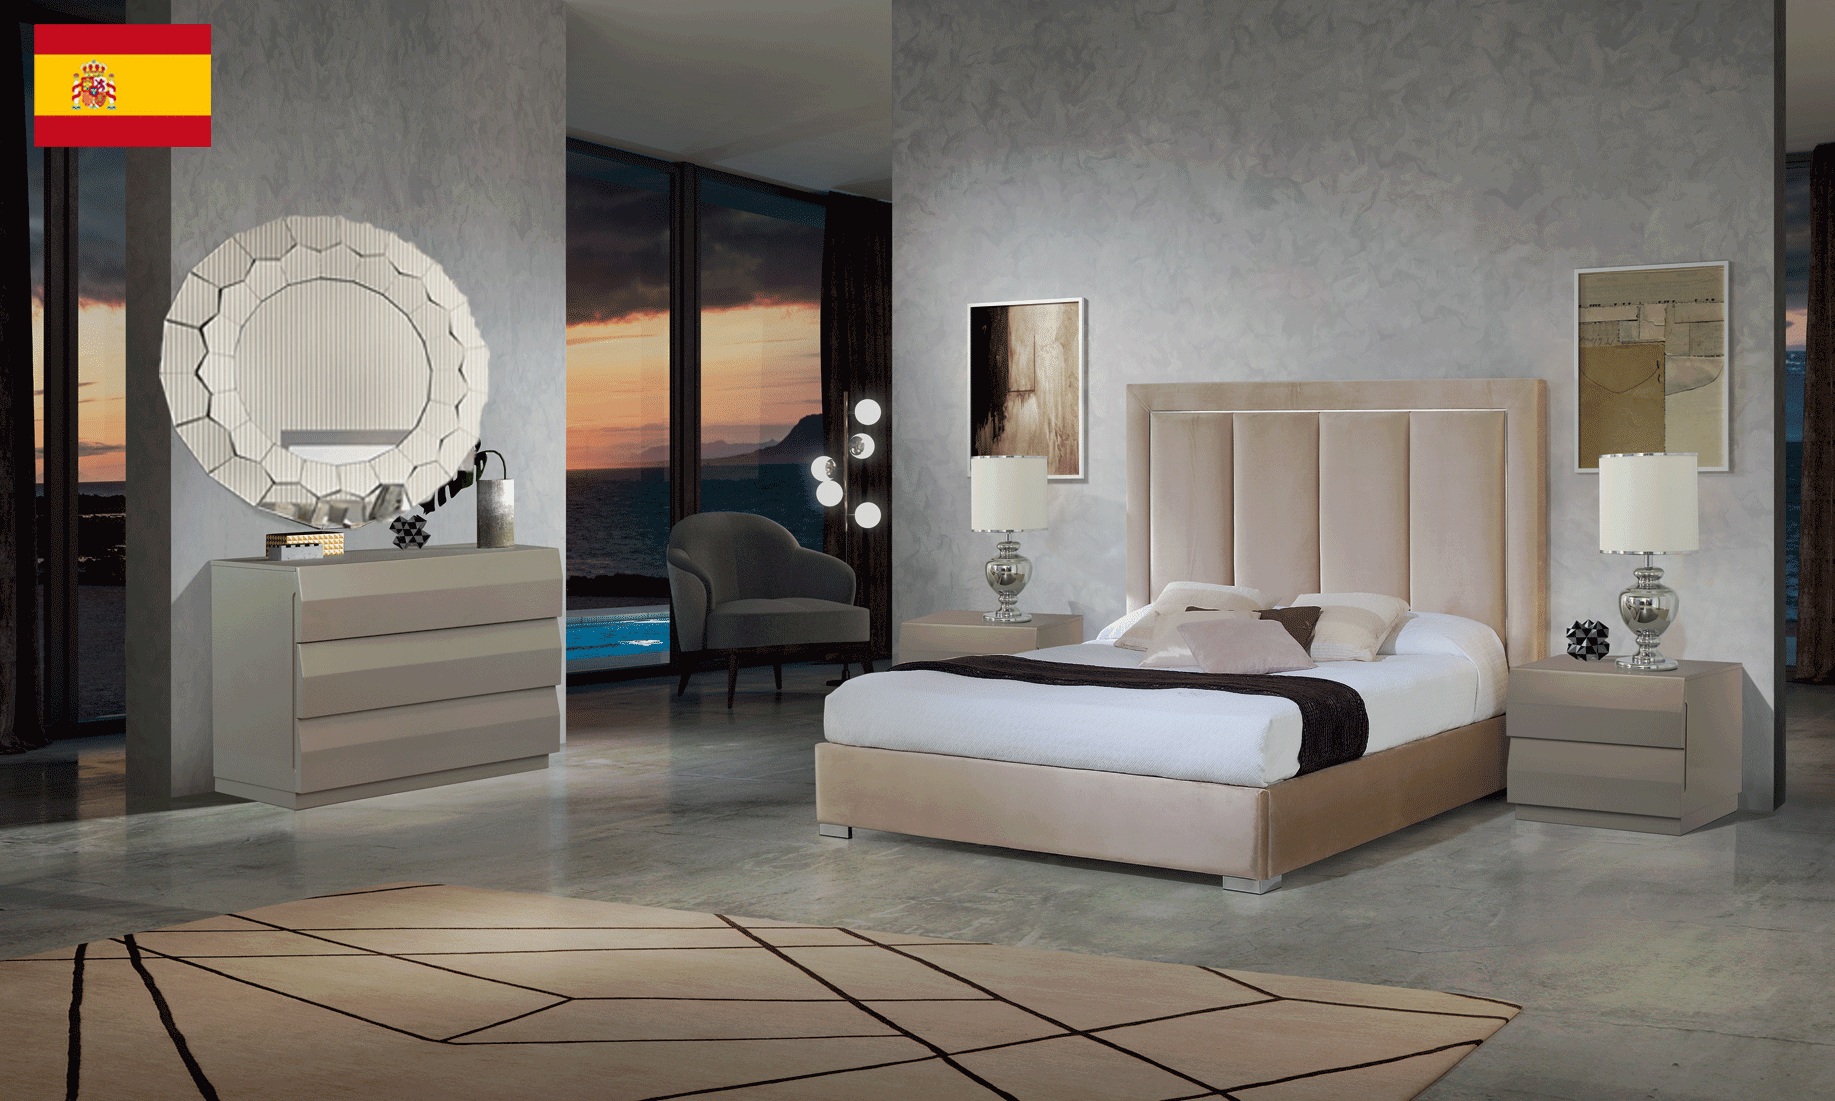 Bedroom Furniture Beds with storage Monica Bedroom with Storage, M152, C152, E115